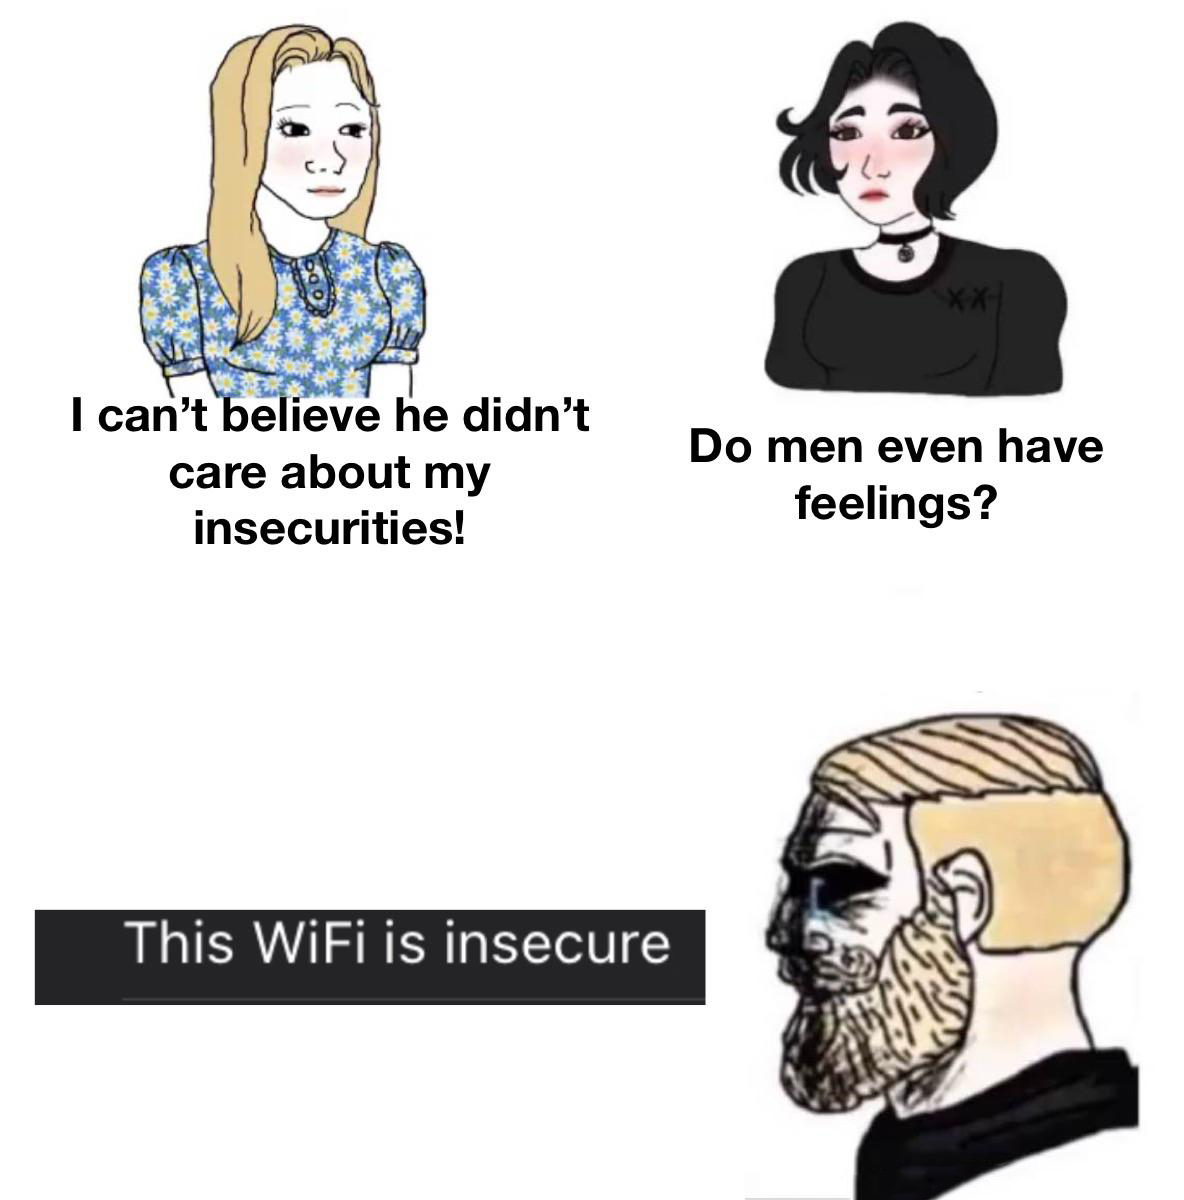 funny memes - do men even have feelings meme minecraft - I can't believe he didn't care about my insecurities! Do men even have feelings? This WiFi is insecure